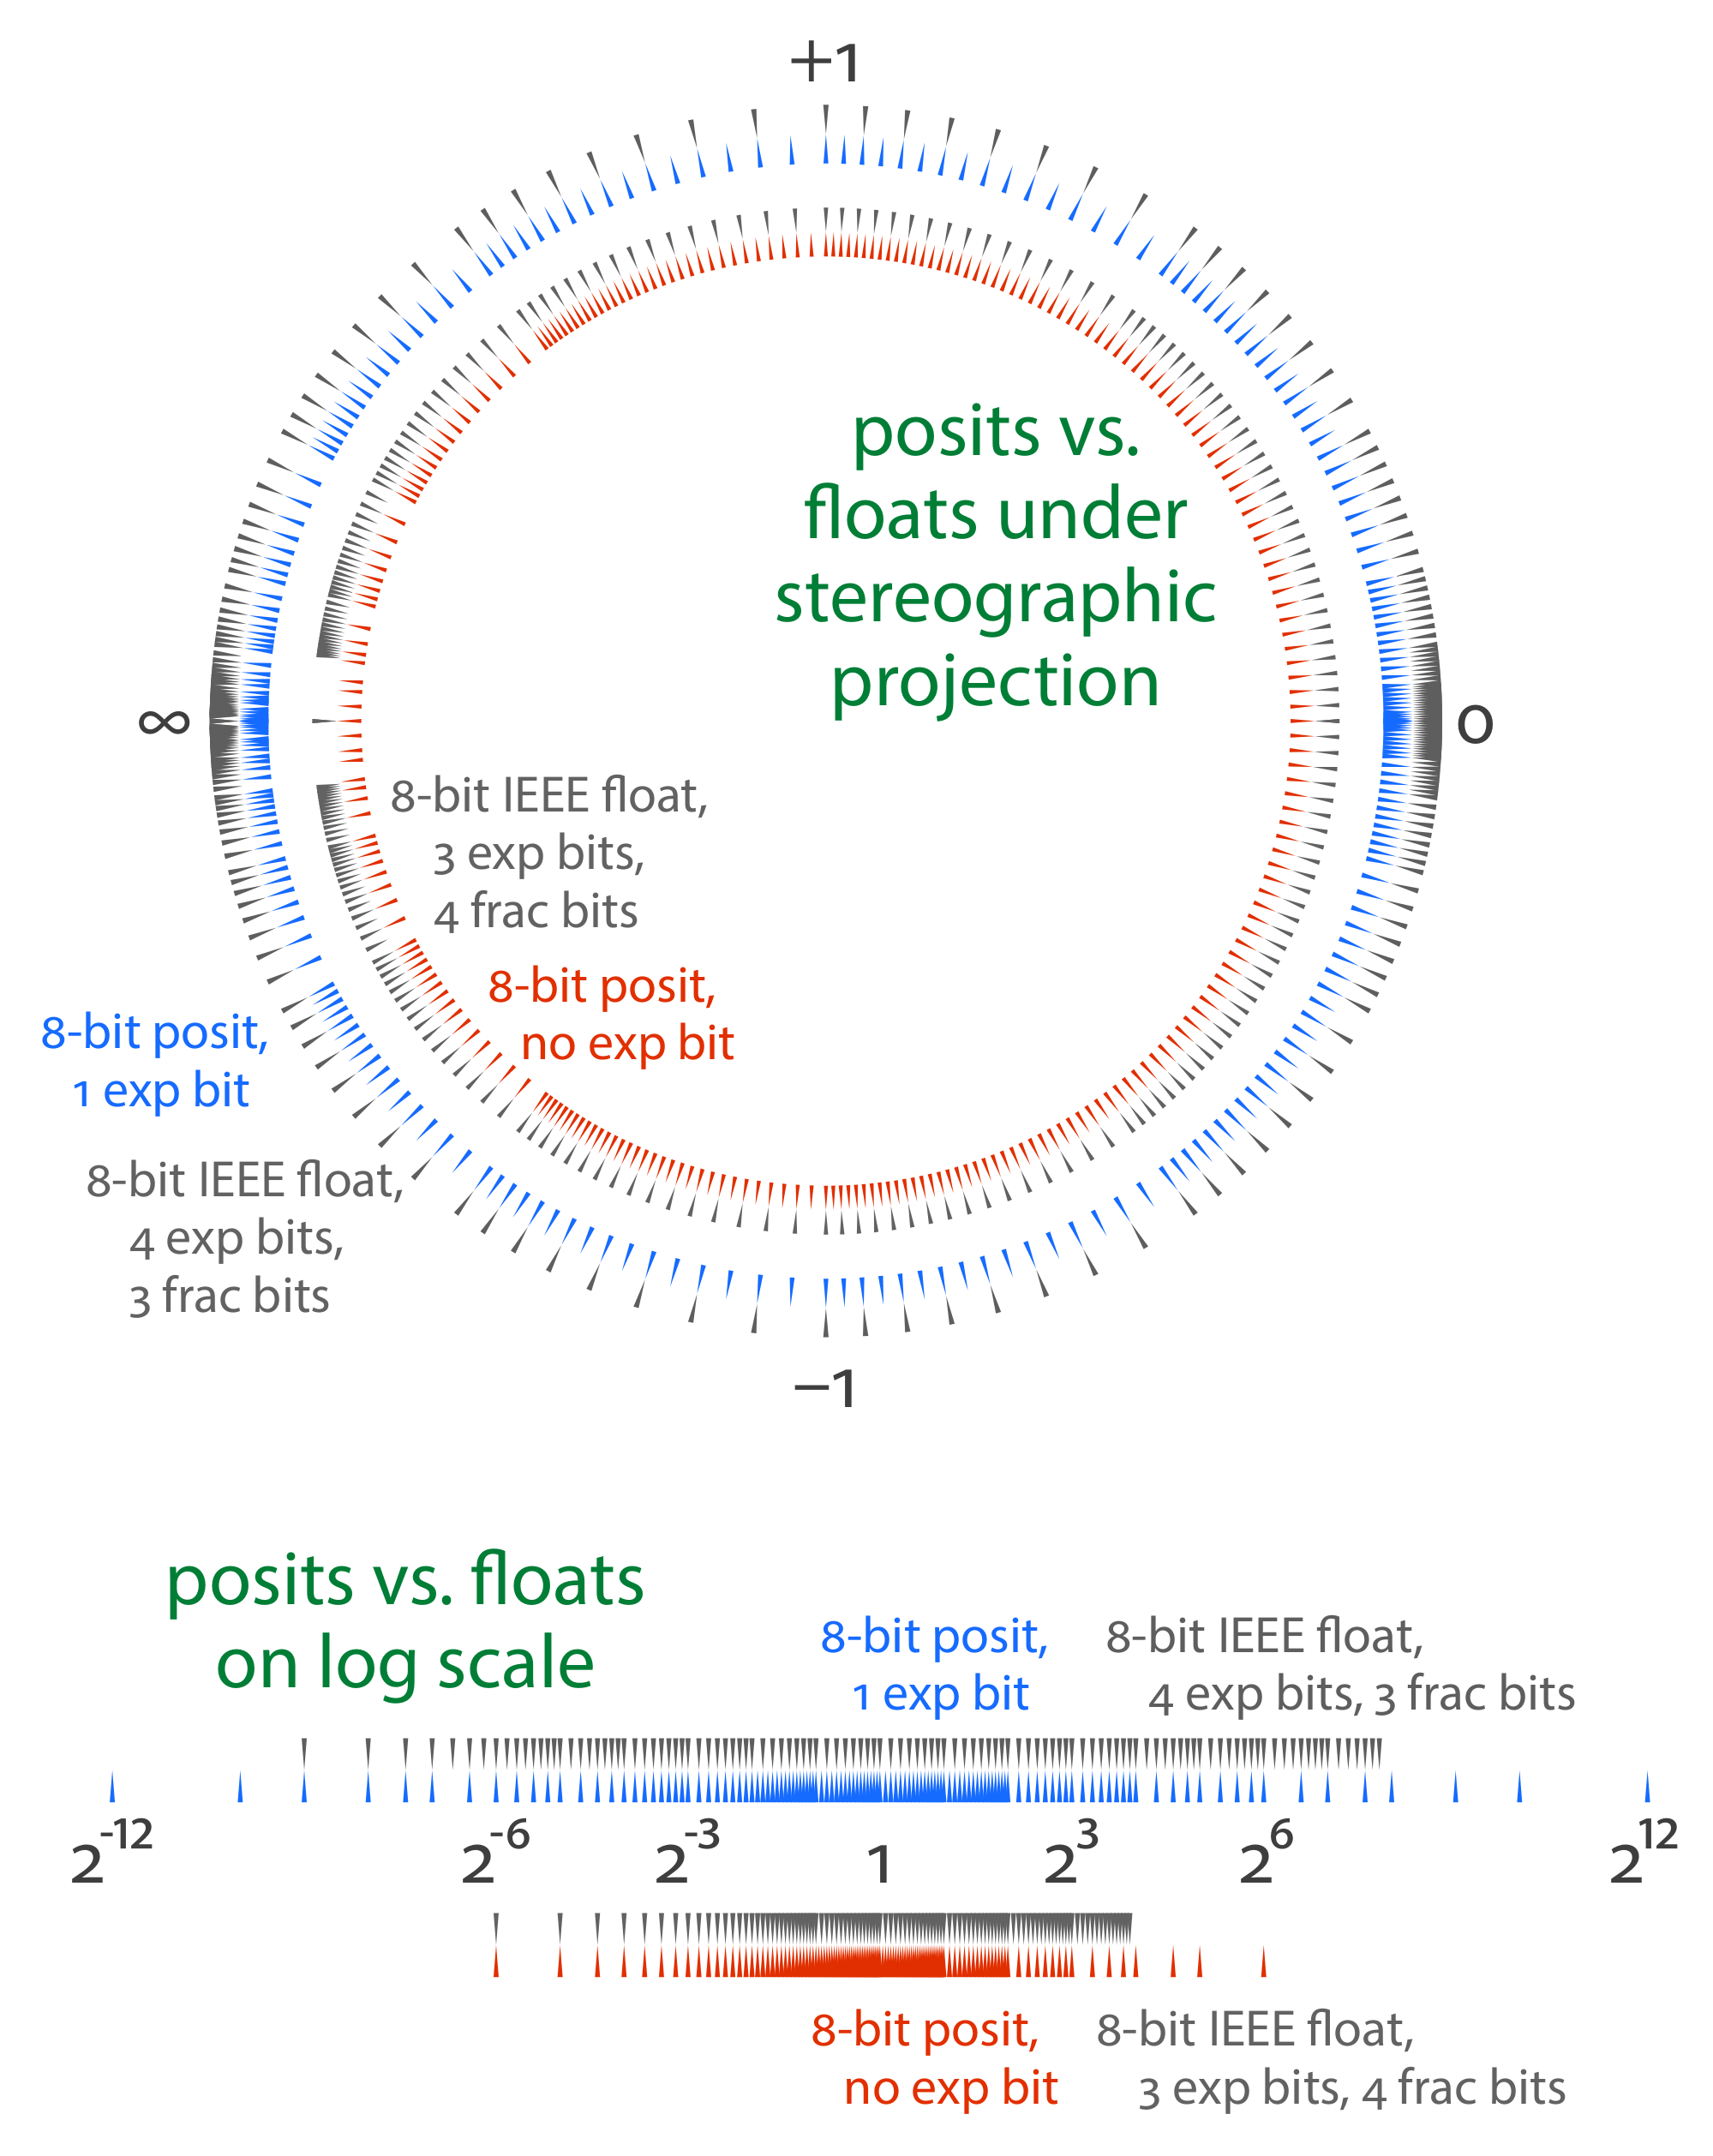 comparaison_floats_vs_posits_under_stereographic_projection.png 50%